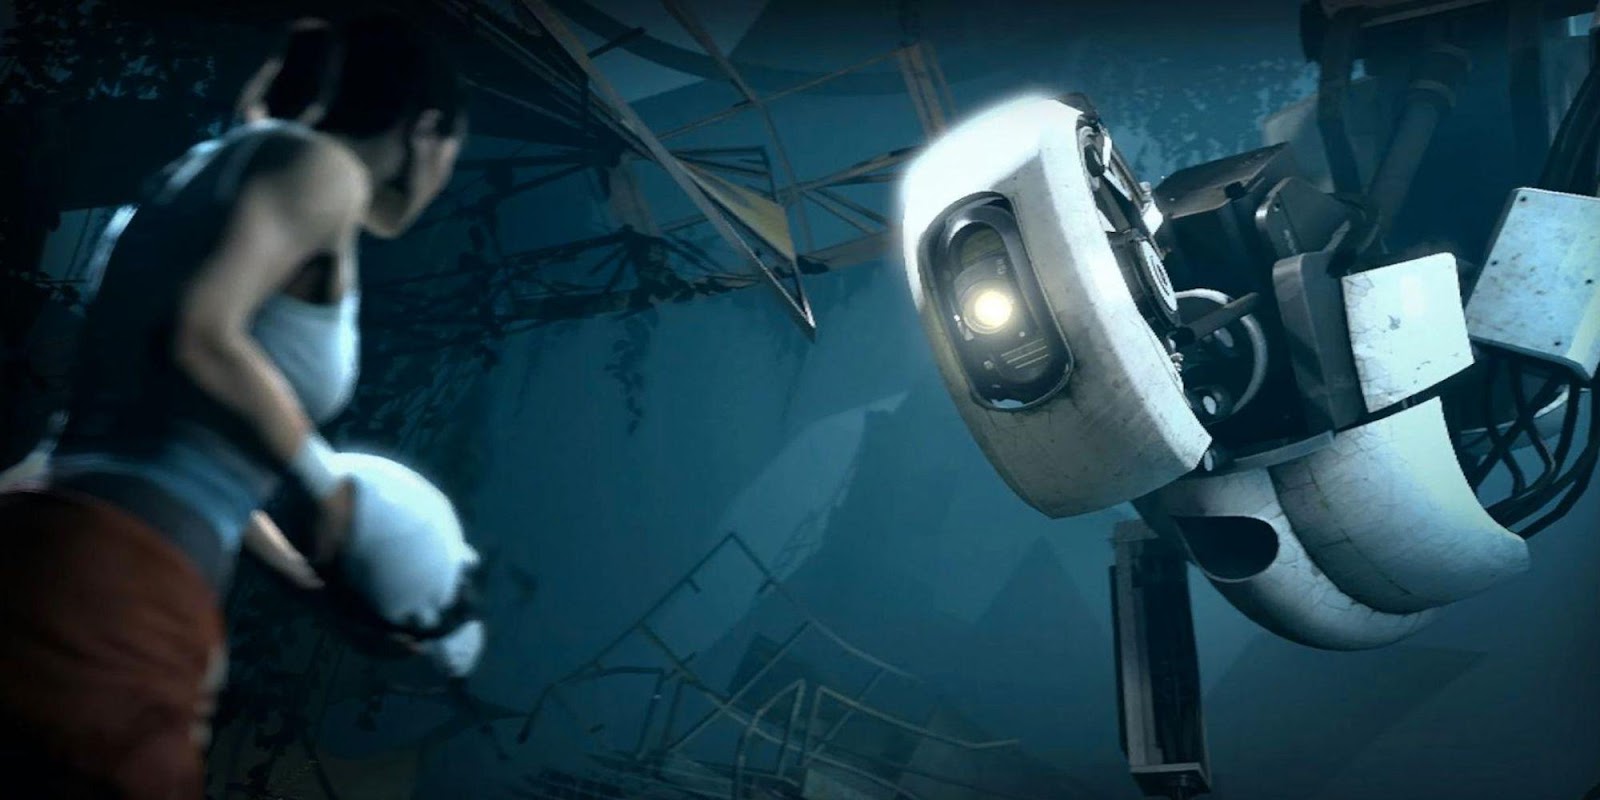 The Most Iconic Video Game Character Is GLaDOS From Portal